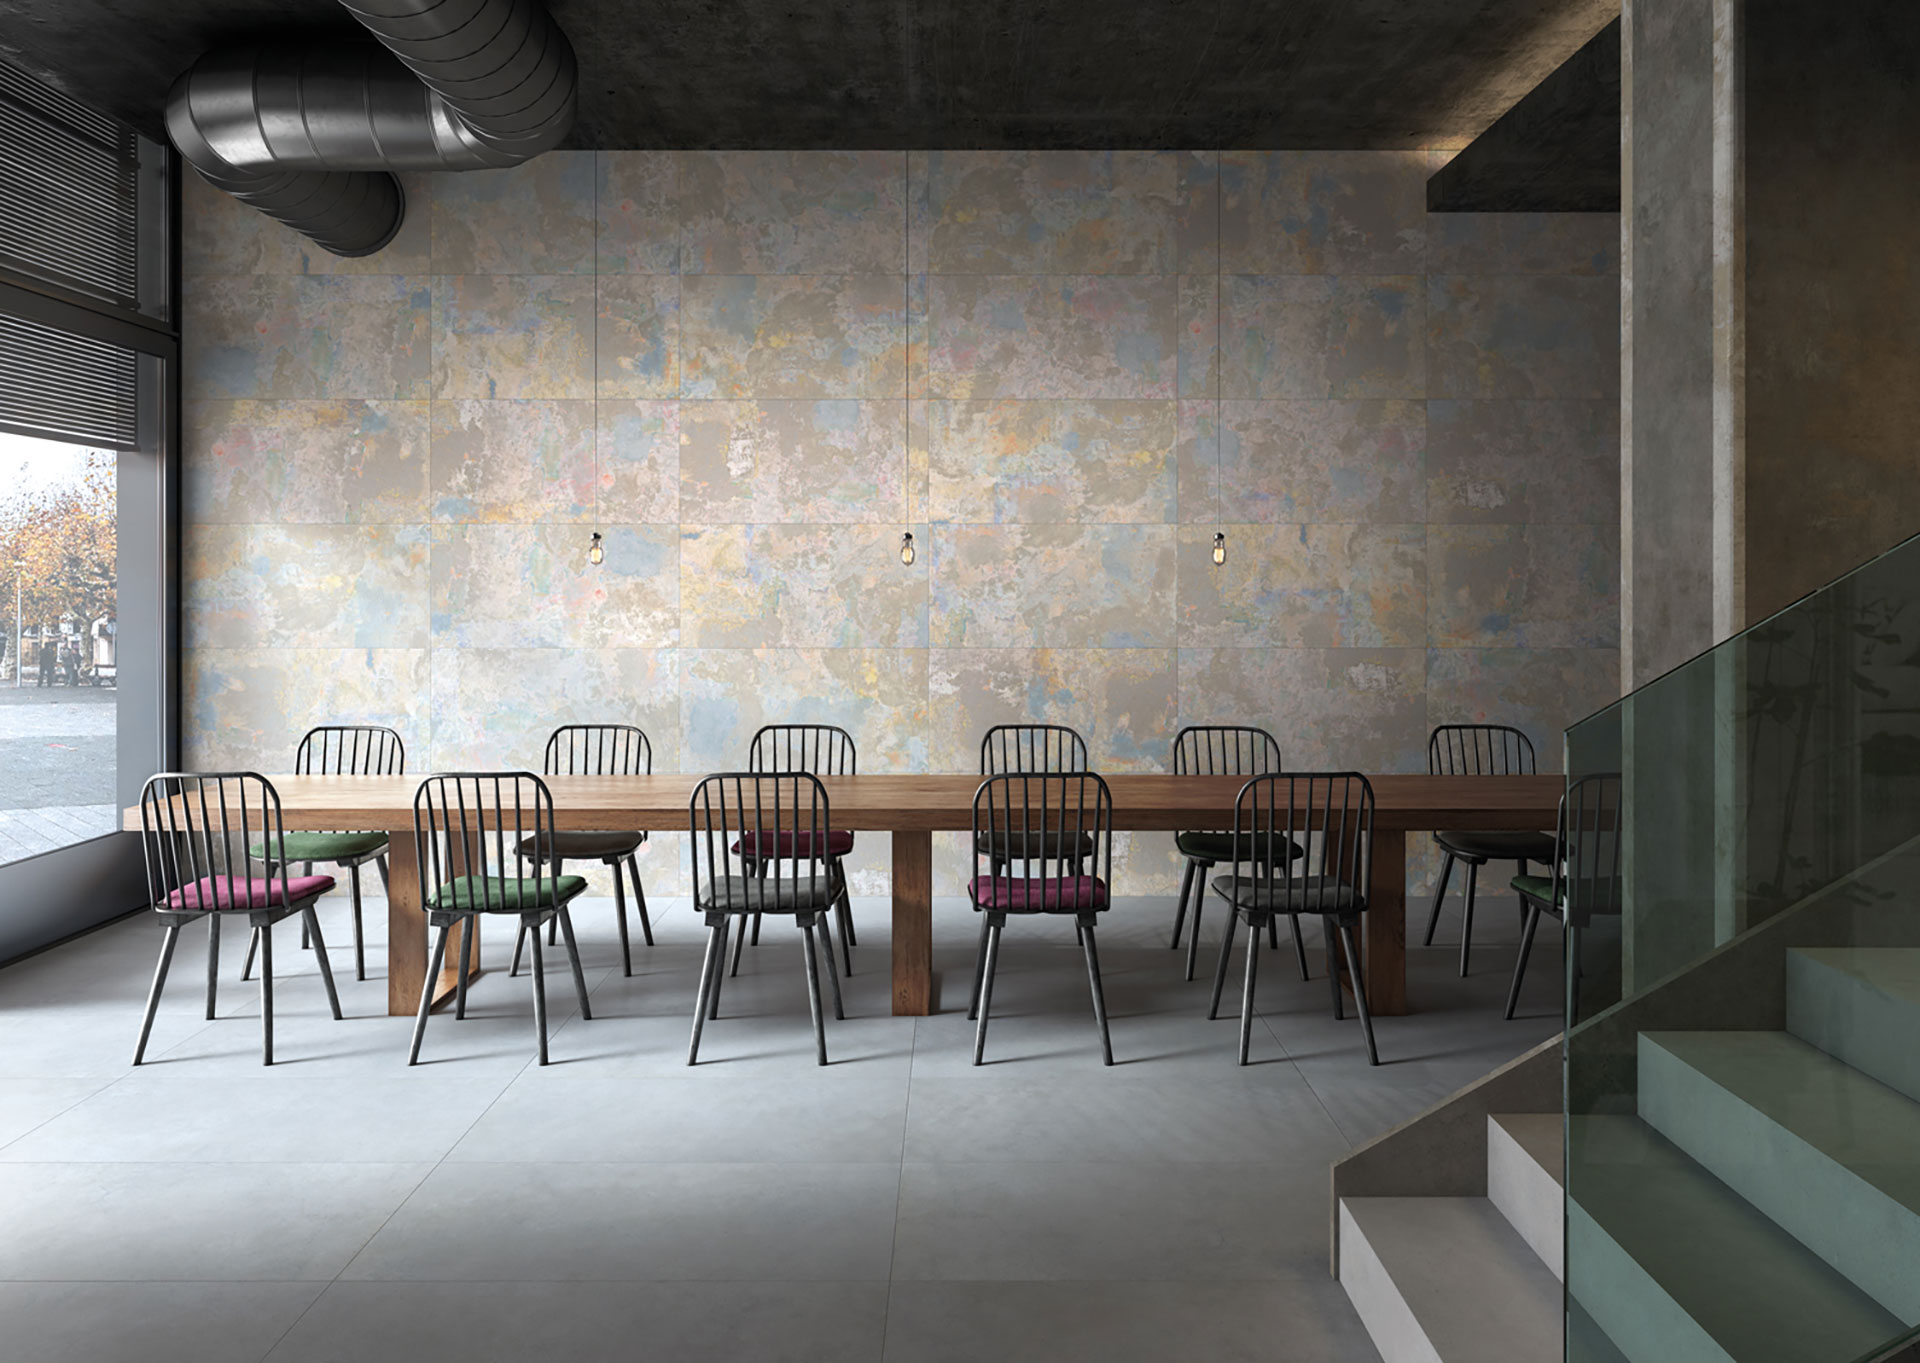 Achieving an Industrial Look With Venetian Plaster